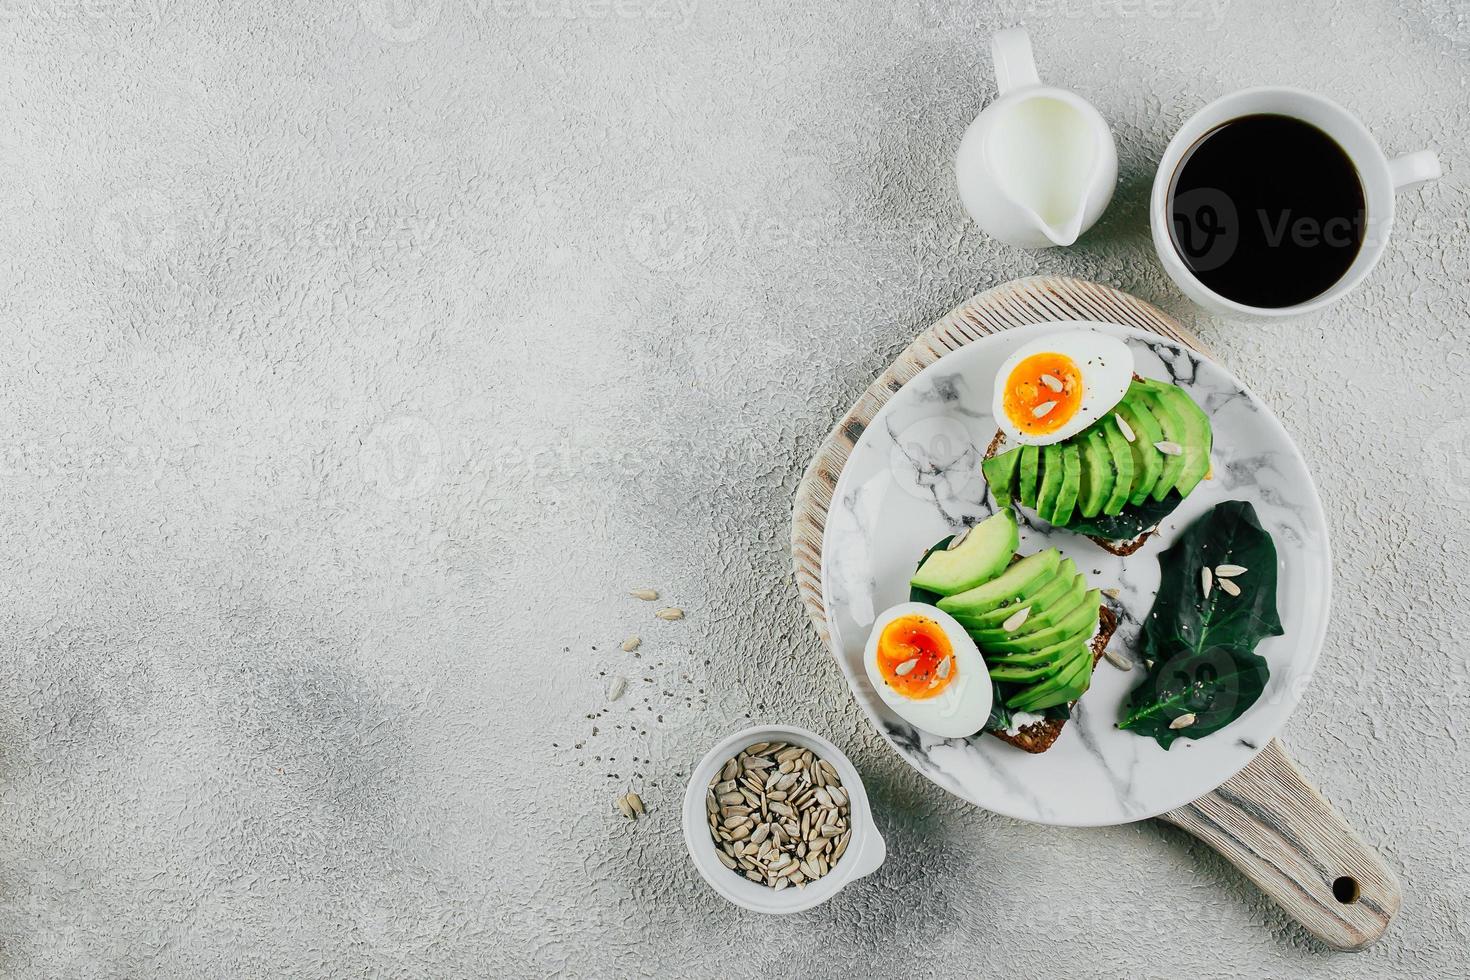 Food Background with avocado toast on rye grain bread. Cup of coffee. Healthy Breakfast Concept photo